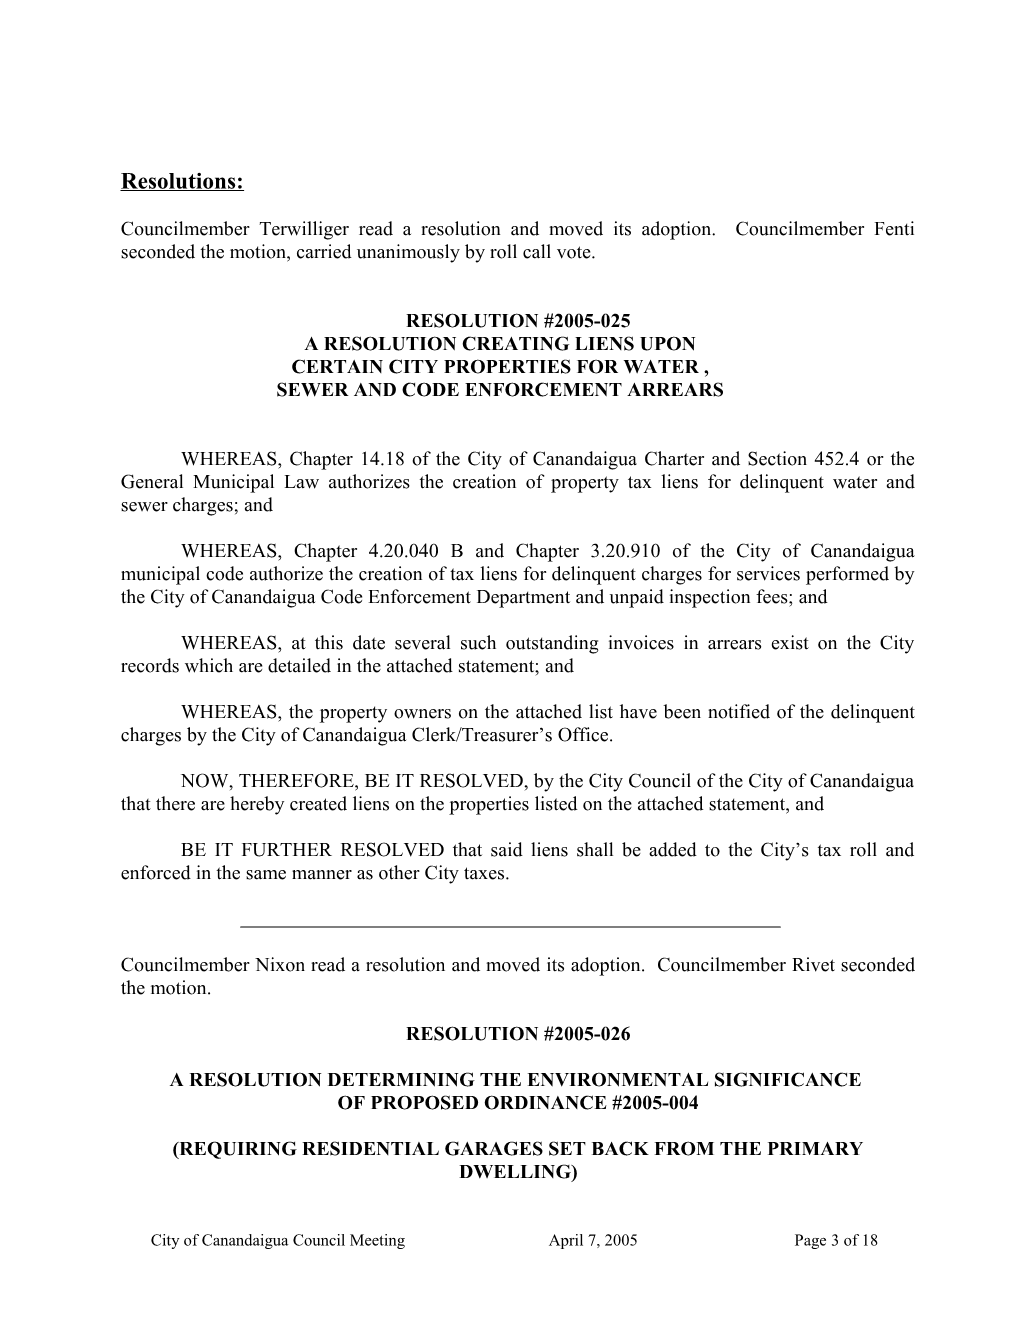 Bond Resolution of the City Council of the City of Geneva, Ontario County, New York (The